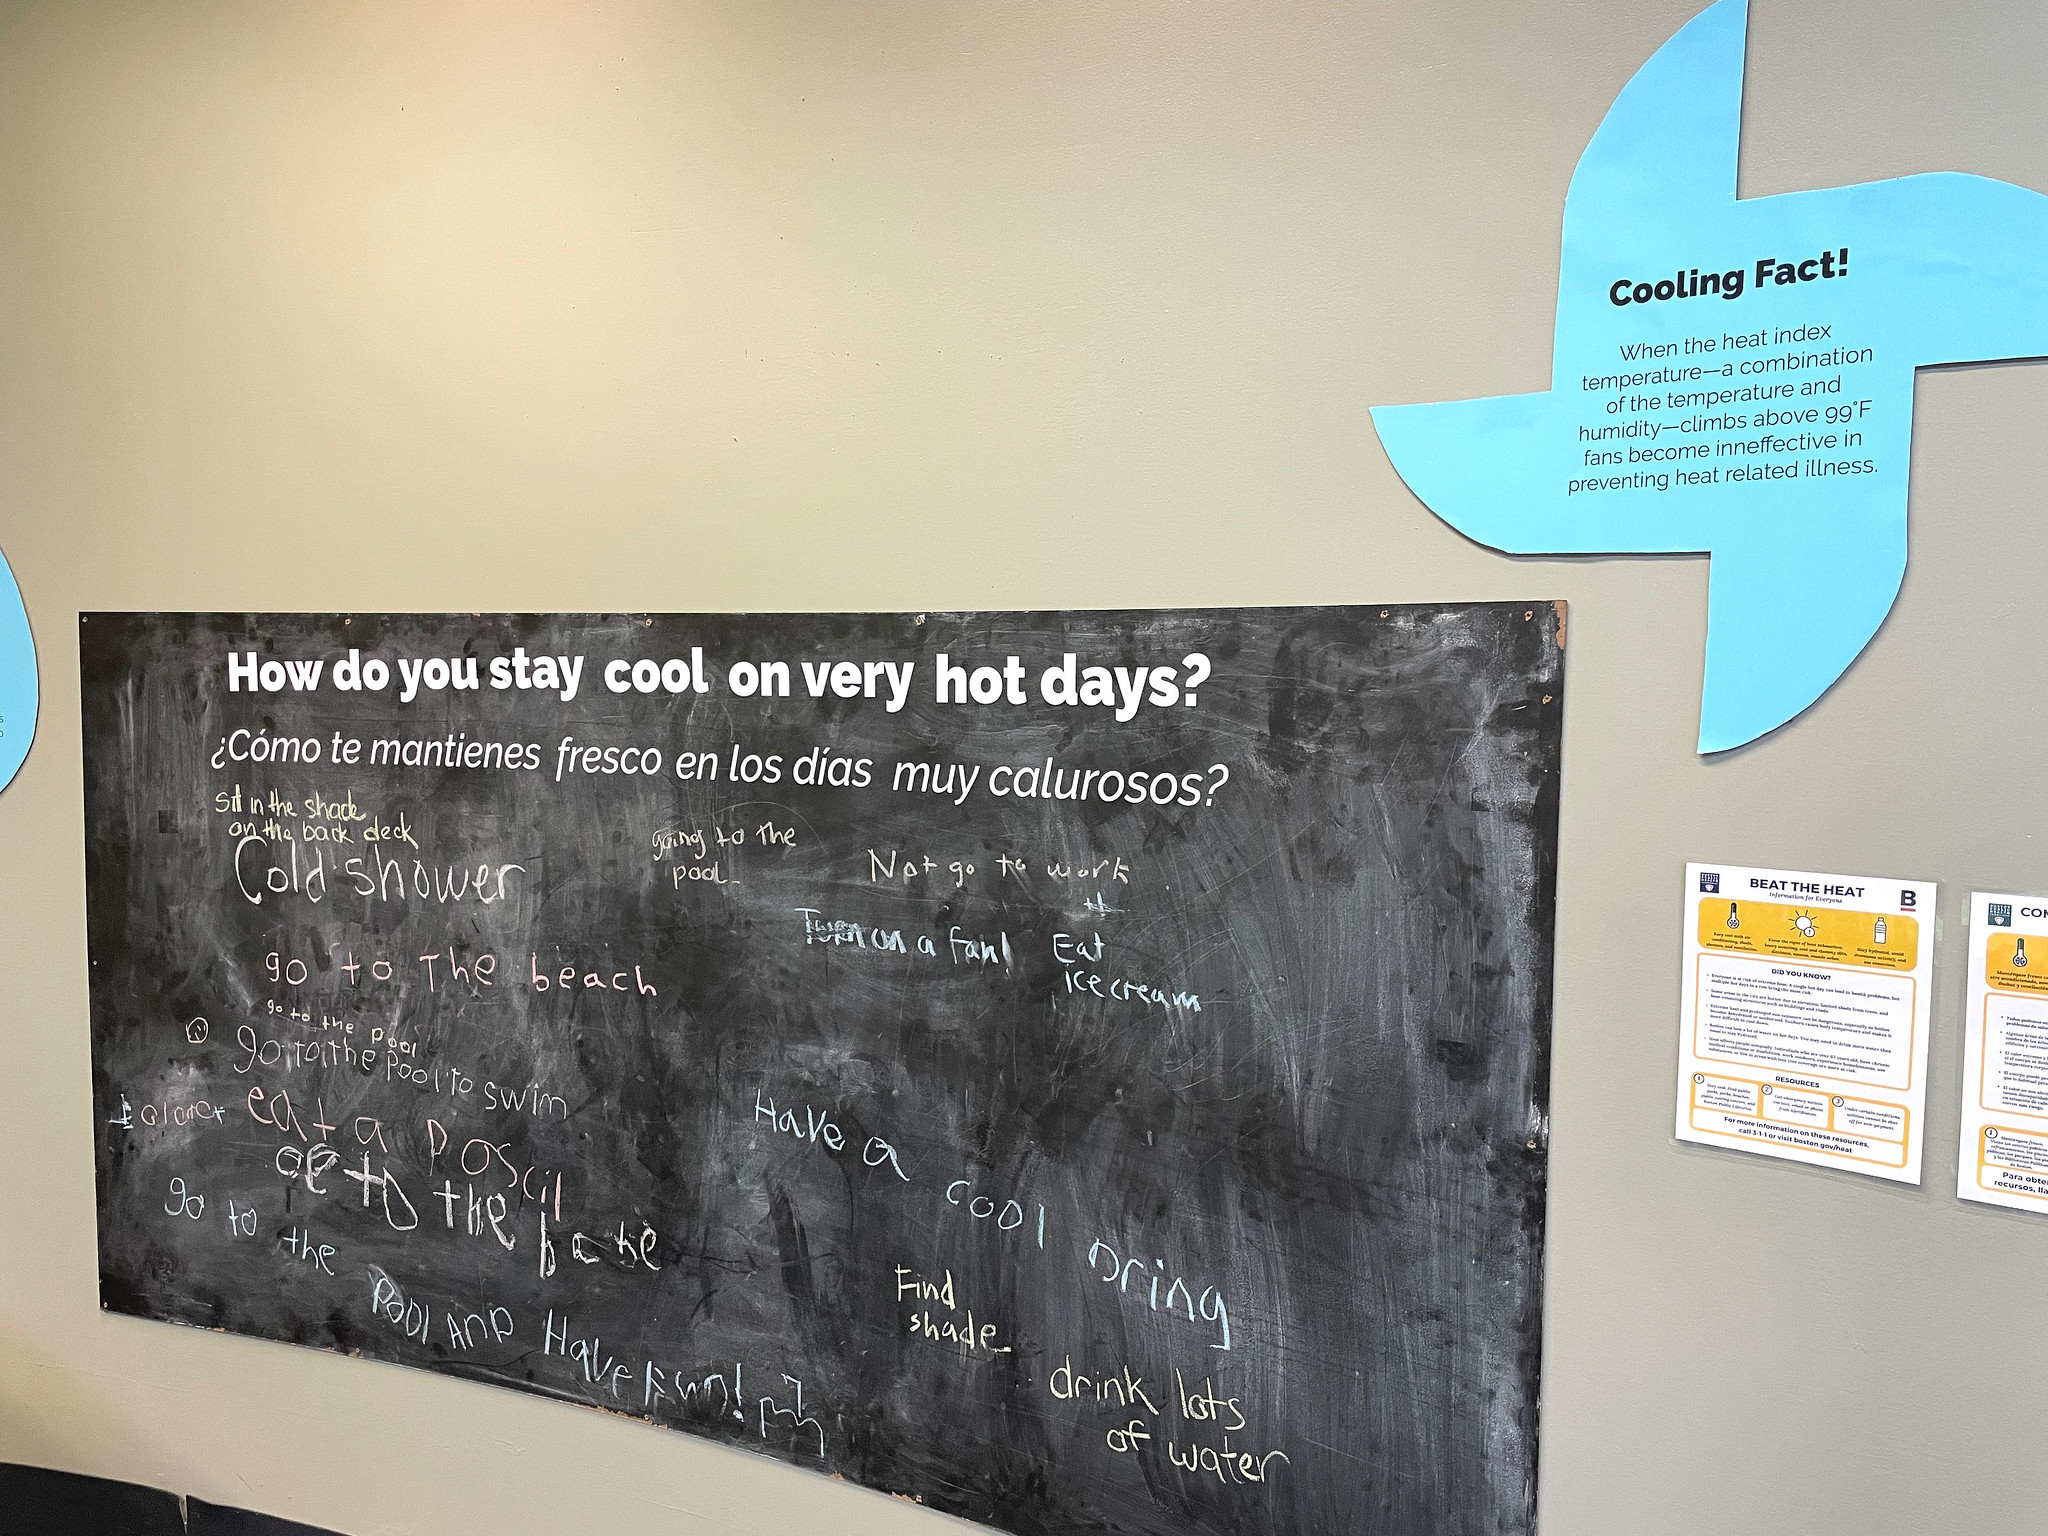 Chalkboard reading "How do you stay cool on very hot days?" and a cooling fact.